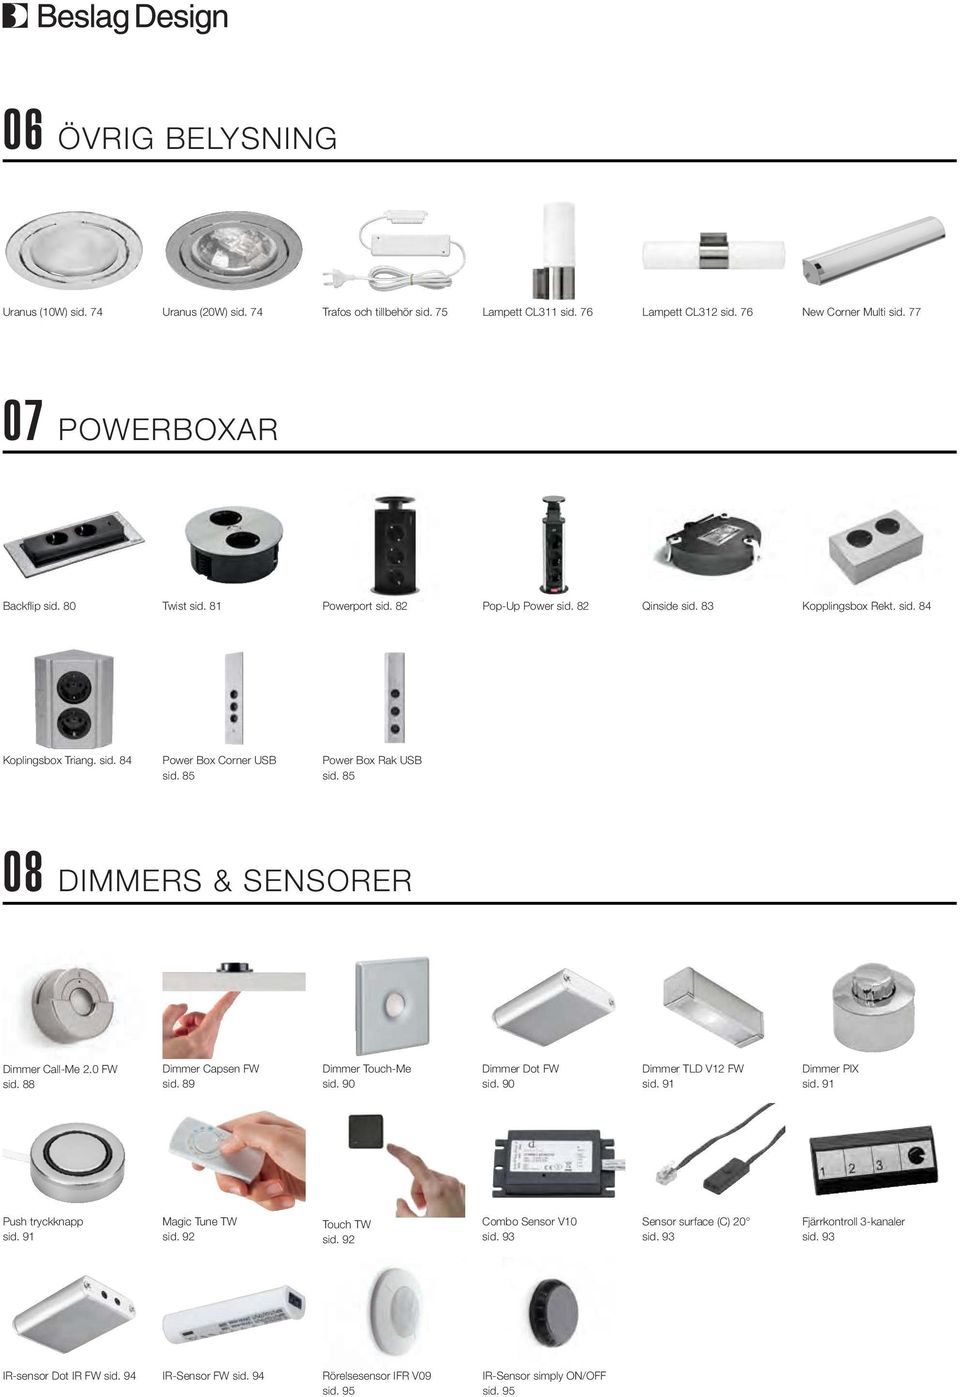 85 8 DIMMERS & SENSORER Dimmer Call-Me 2. FW sid. 88 Dimmer Capsen FW sid. 89 Dimmer Touch-Me sid. 9 Dimmer Dot FW sid. 9 Dimmer TLD V12 FW sid. 91 Dimmer PIX sid. 91 Push tryckknapp sid.